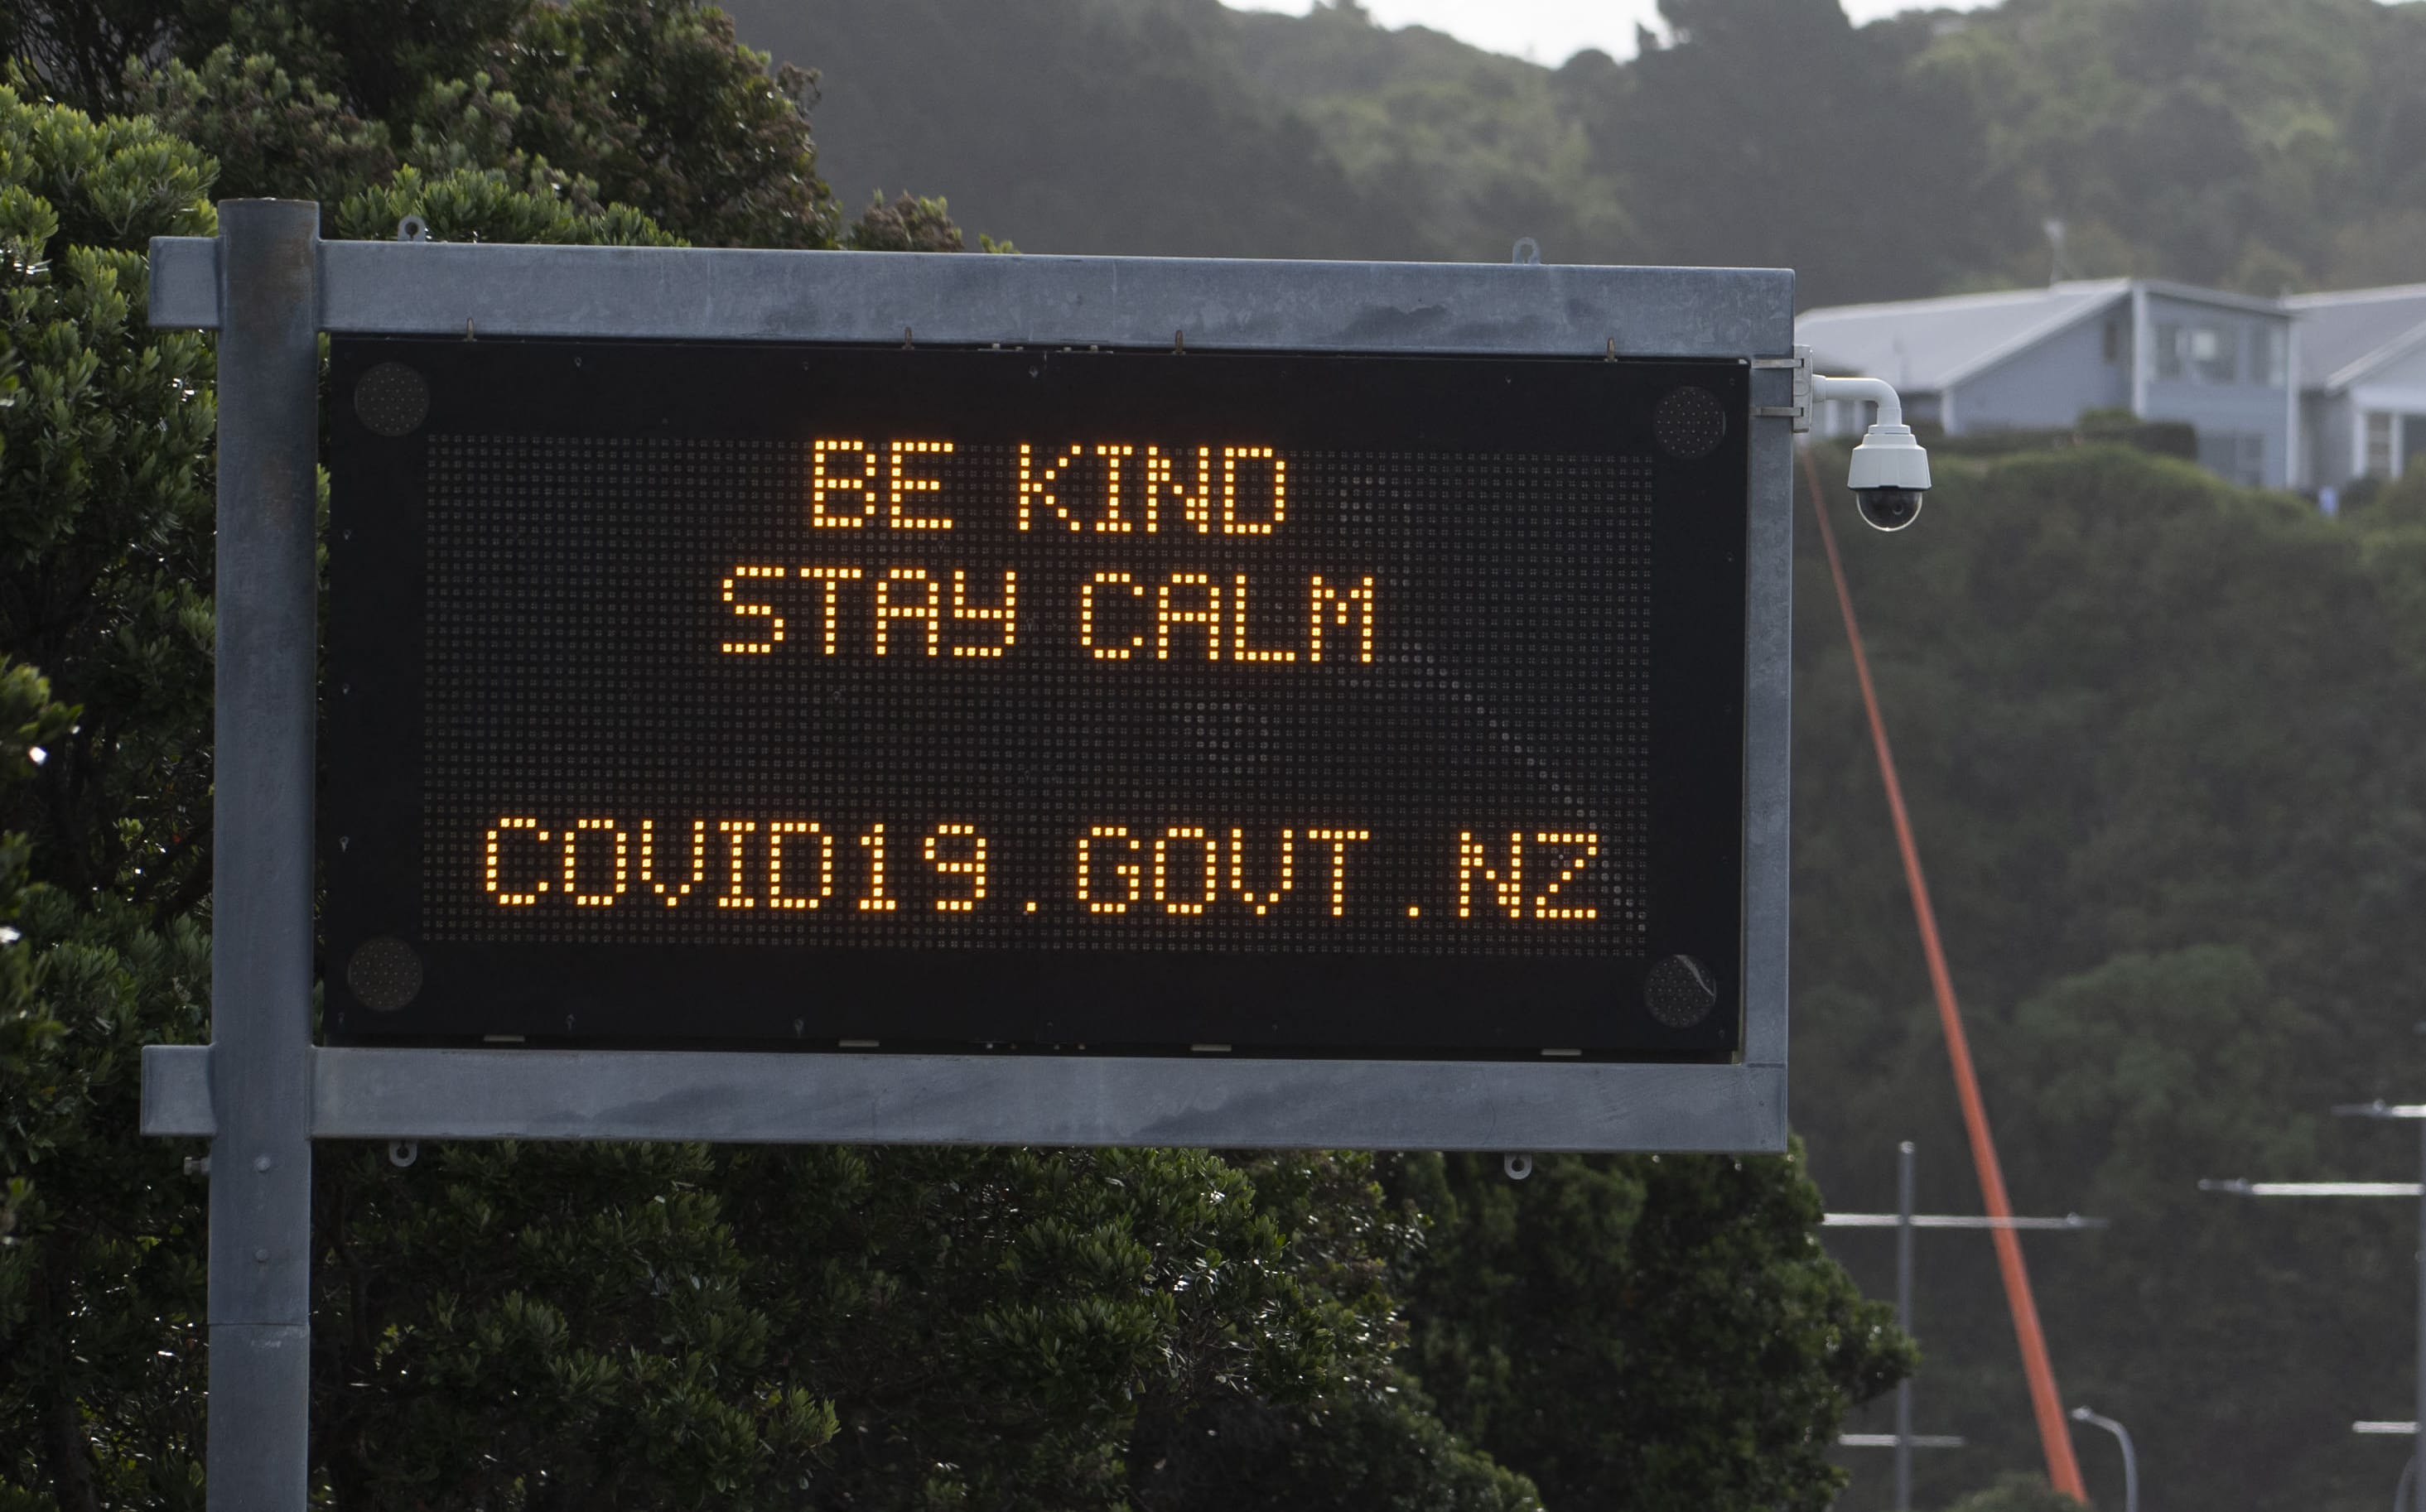 A motorway sign reads "Be kind and stay calm" along a street devoid of cars in response to the COVID-19 coronavirus outbreak in Wellington on April 20, 2020.